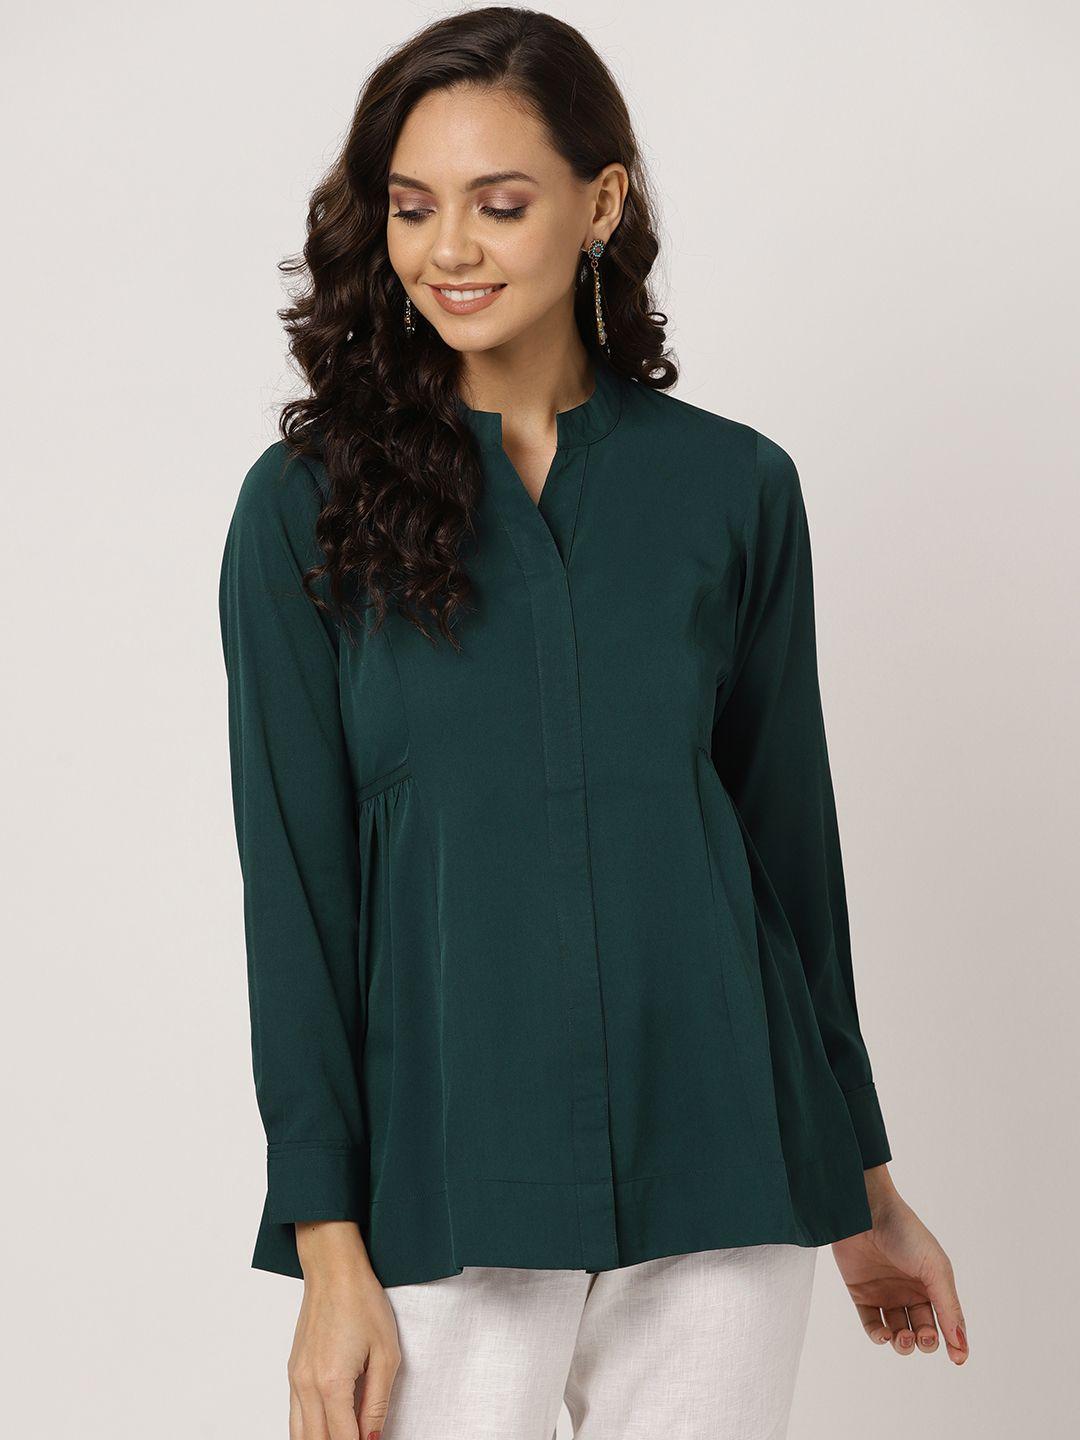 mbe women green solid a-line top